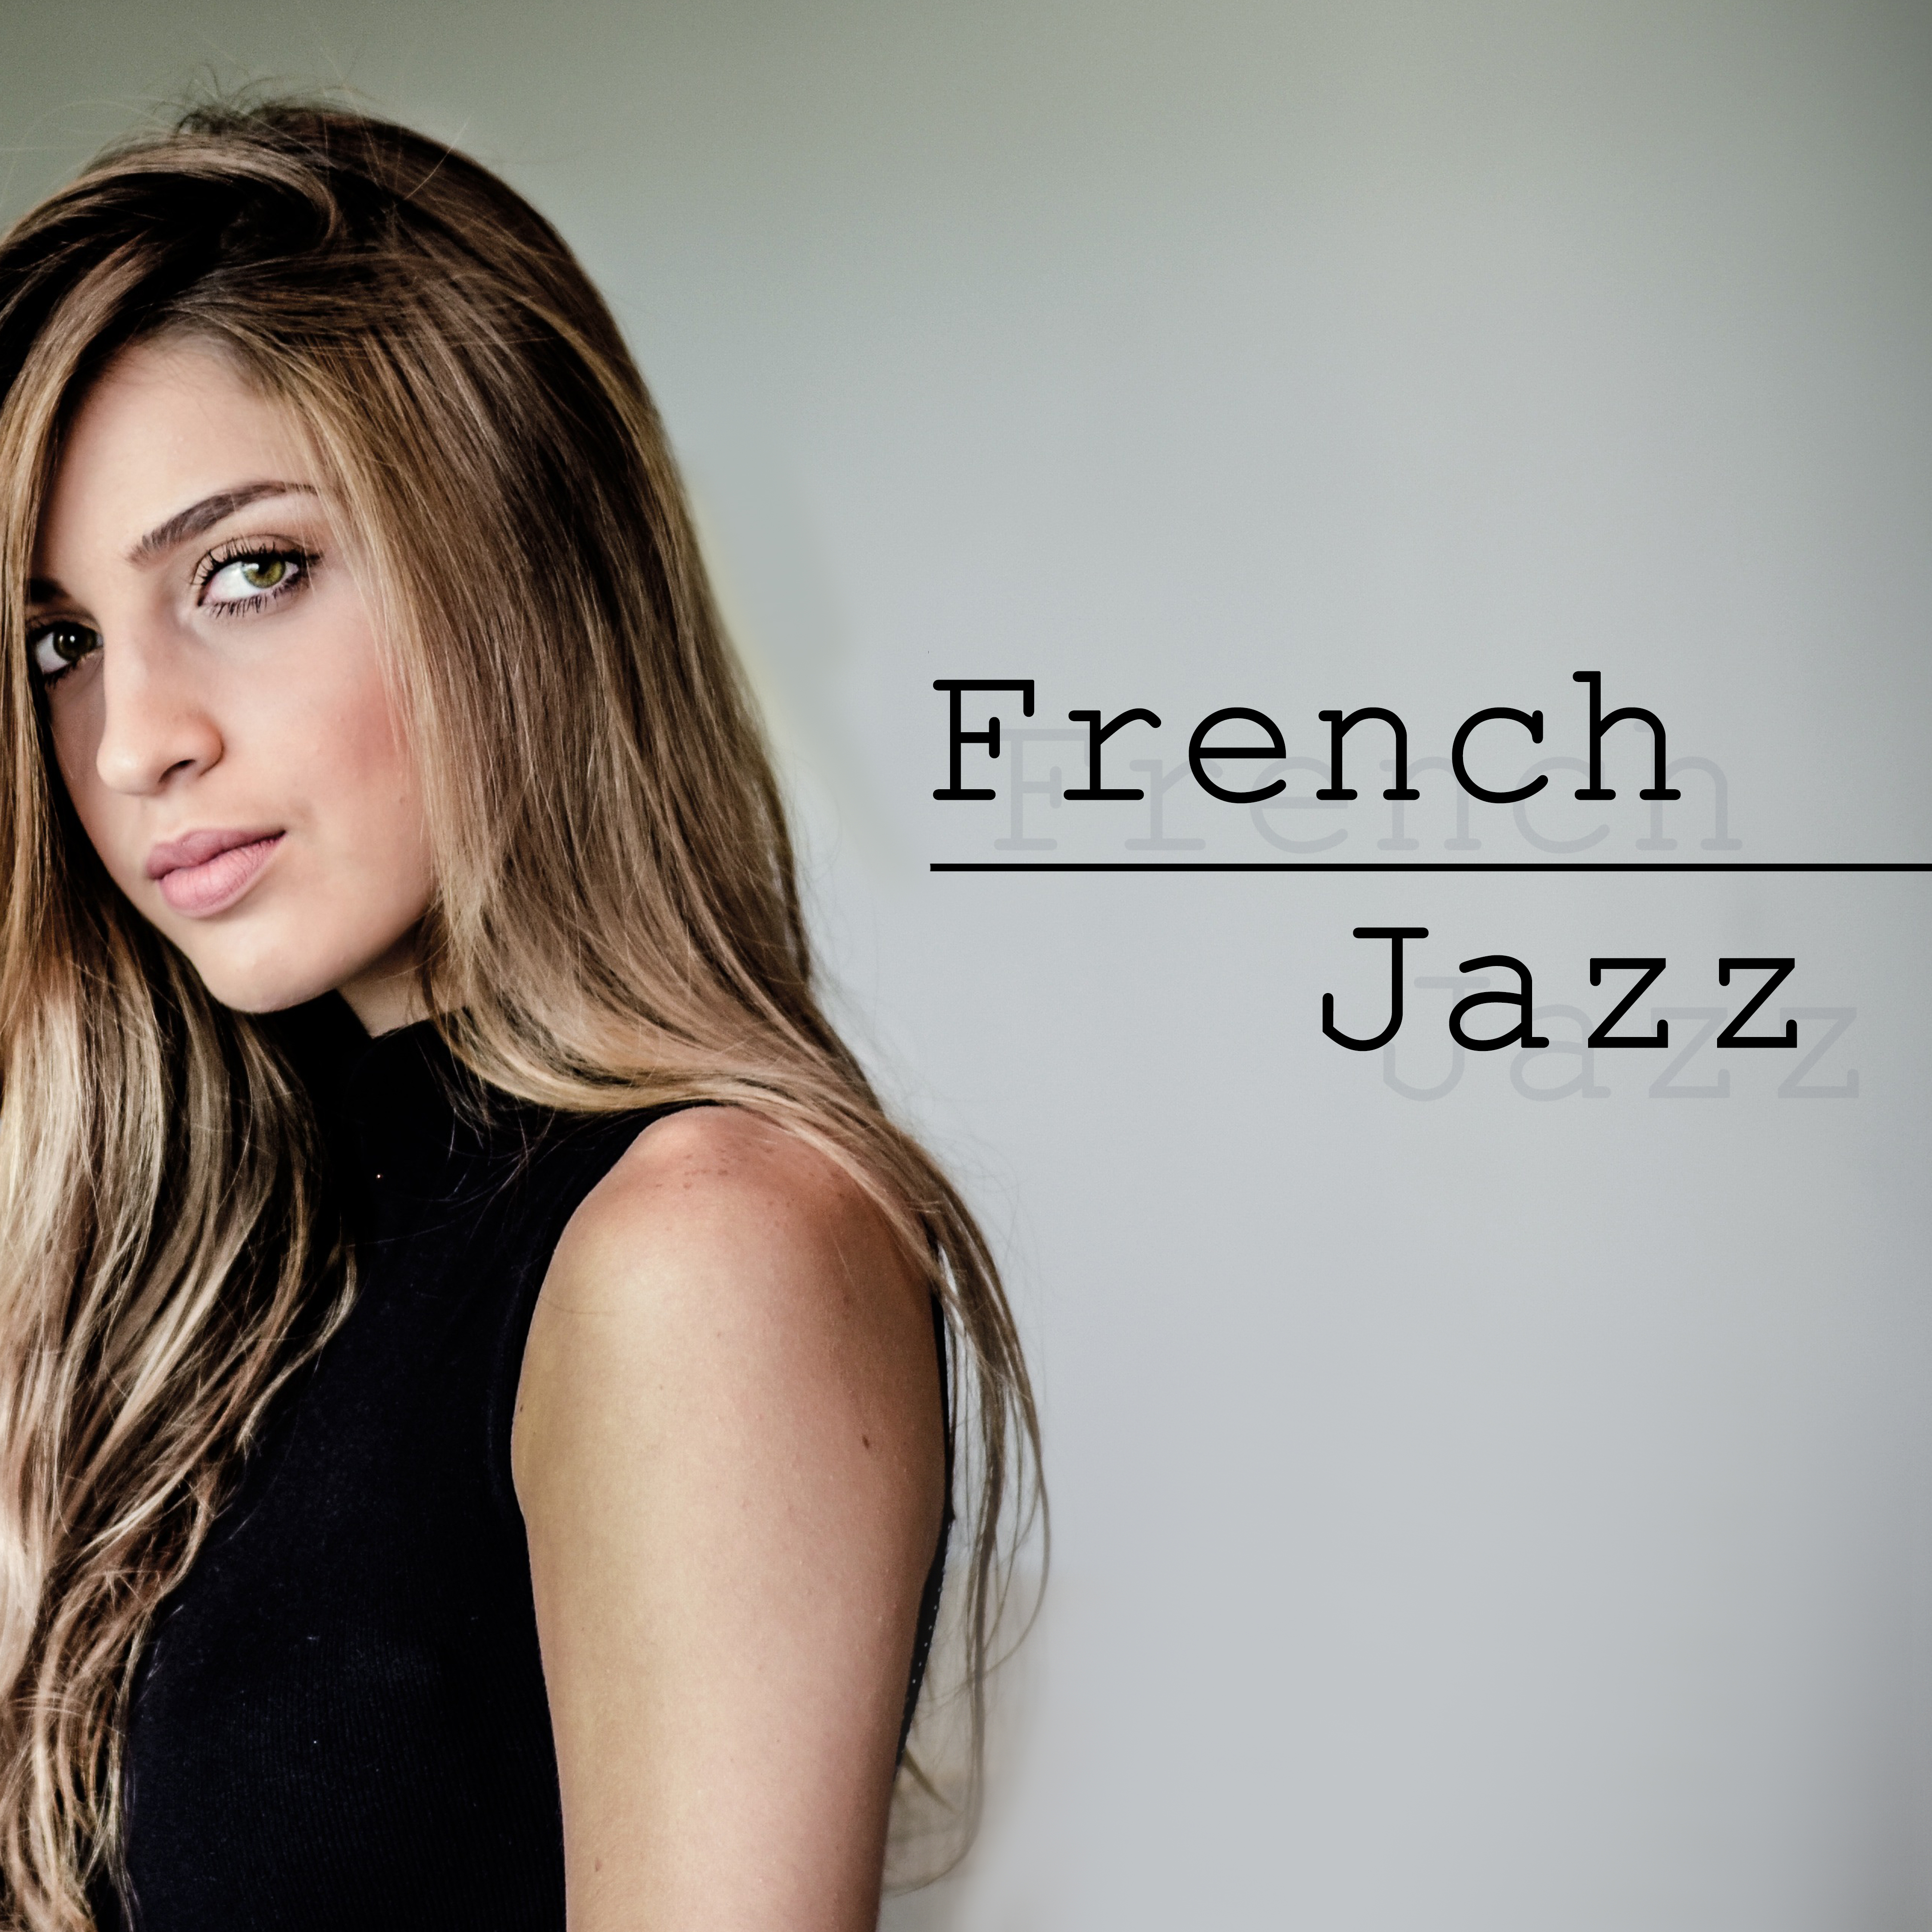 French Jazz – Romantic Music, **** Jazz 2017, Music for Lovers, Making Love